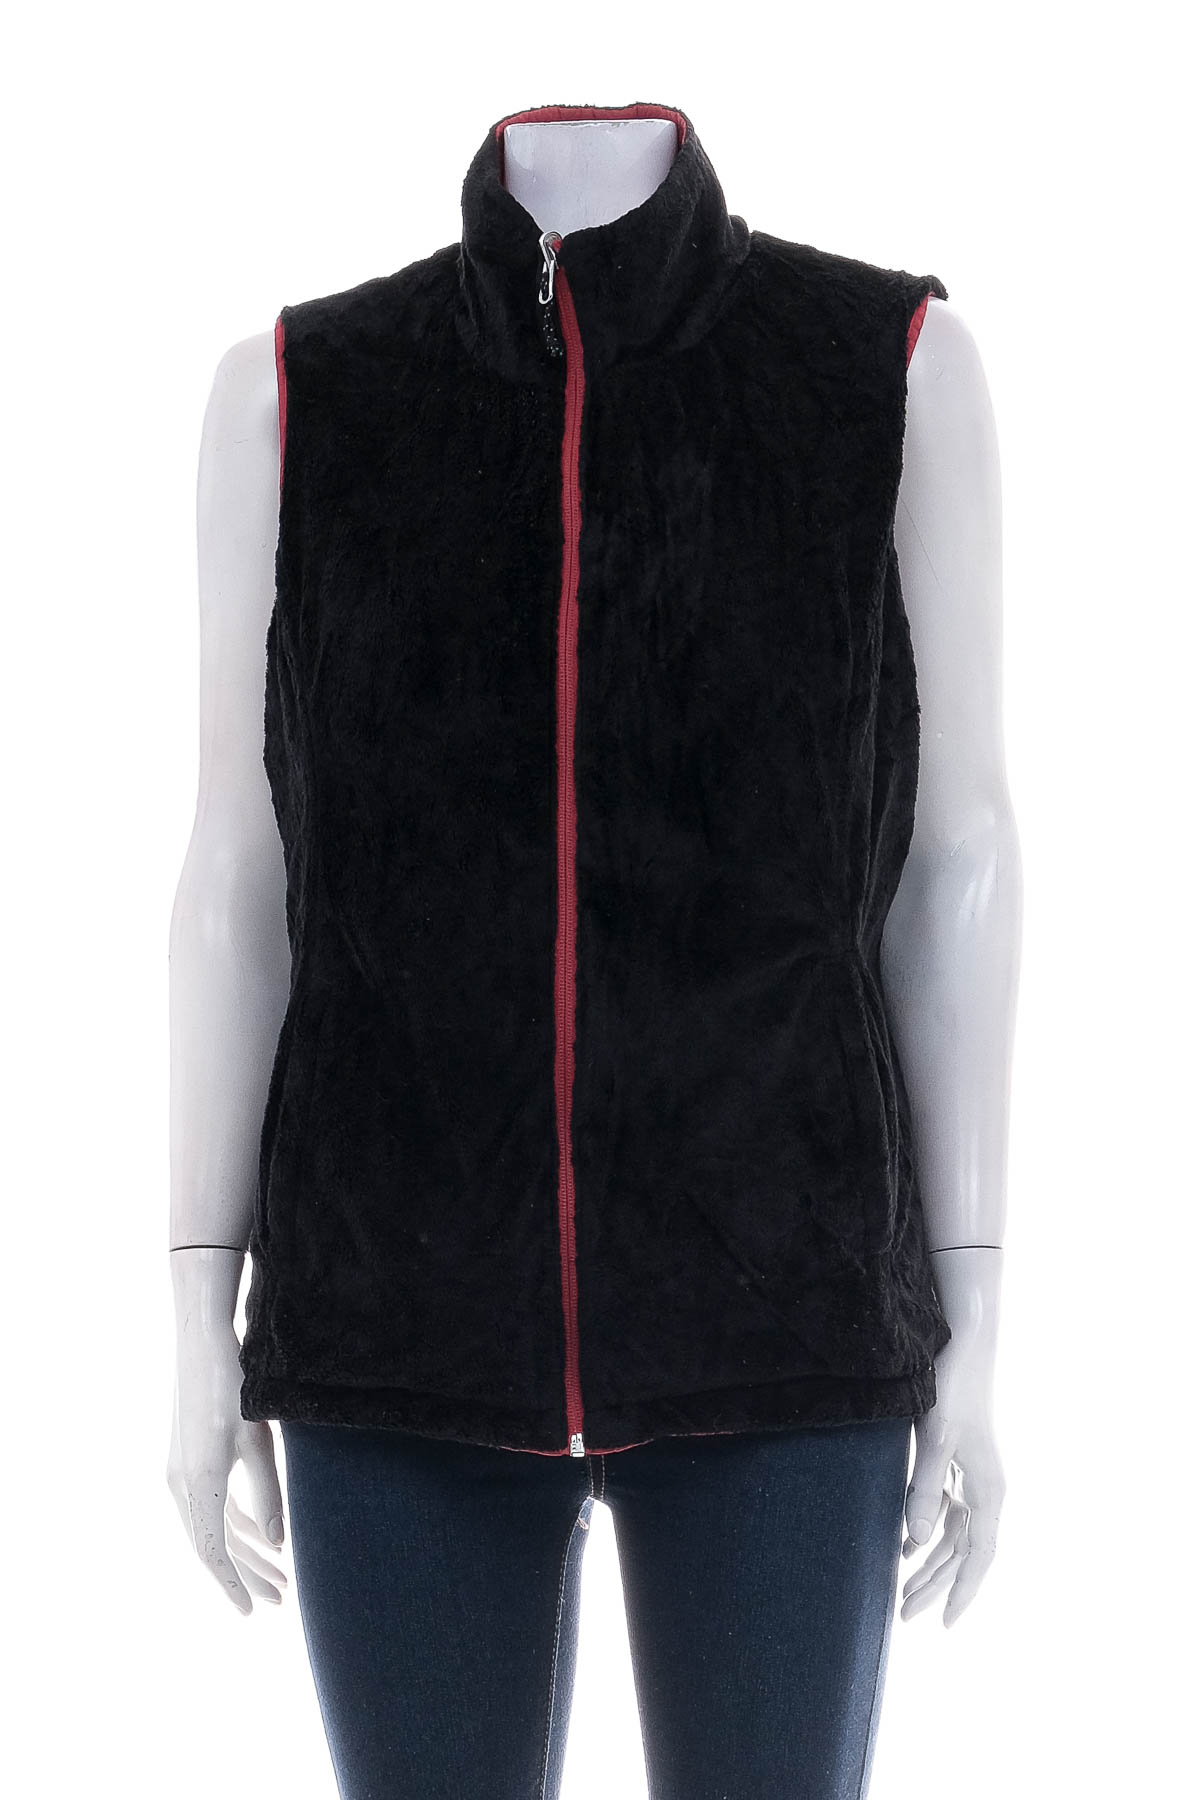 Women's reversible vest - Free Country - 1